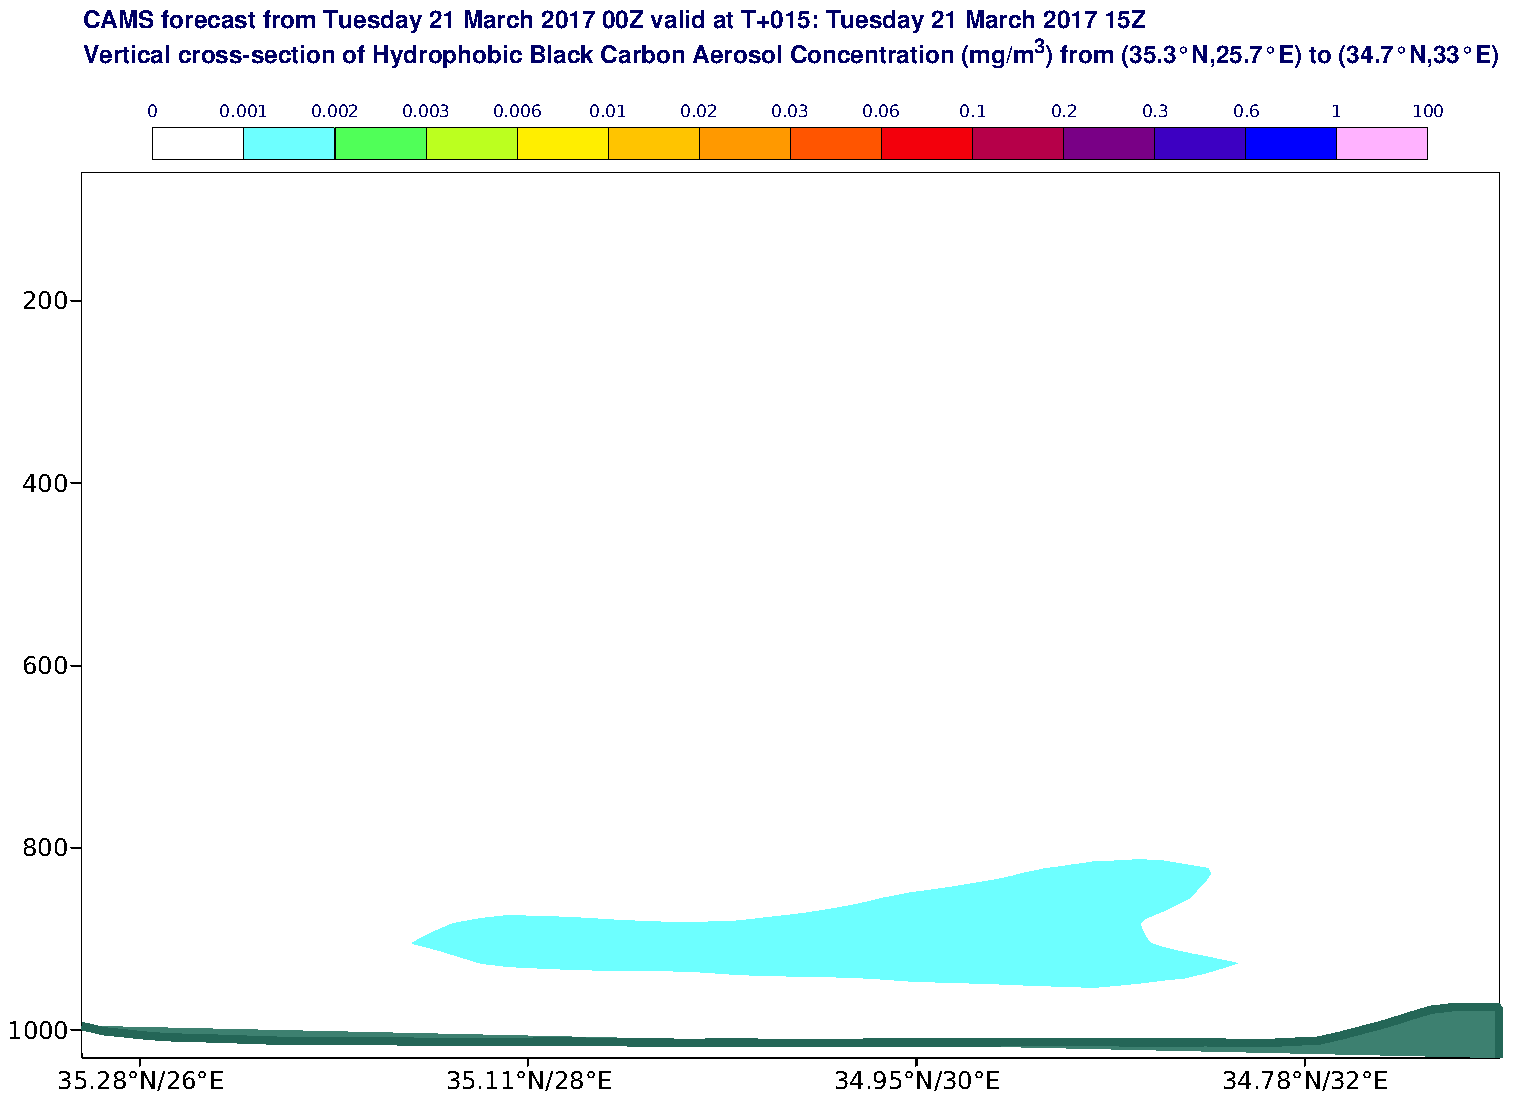 Vertical cross-section of Hydrophobic Black Carbon Aerosol Concentration (mg/m3) valid at T15 - 2017-03-21 15:00